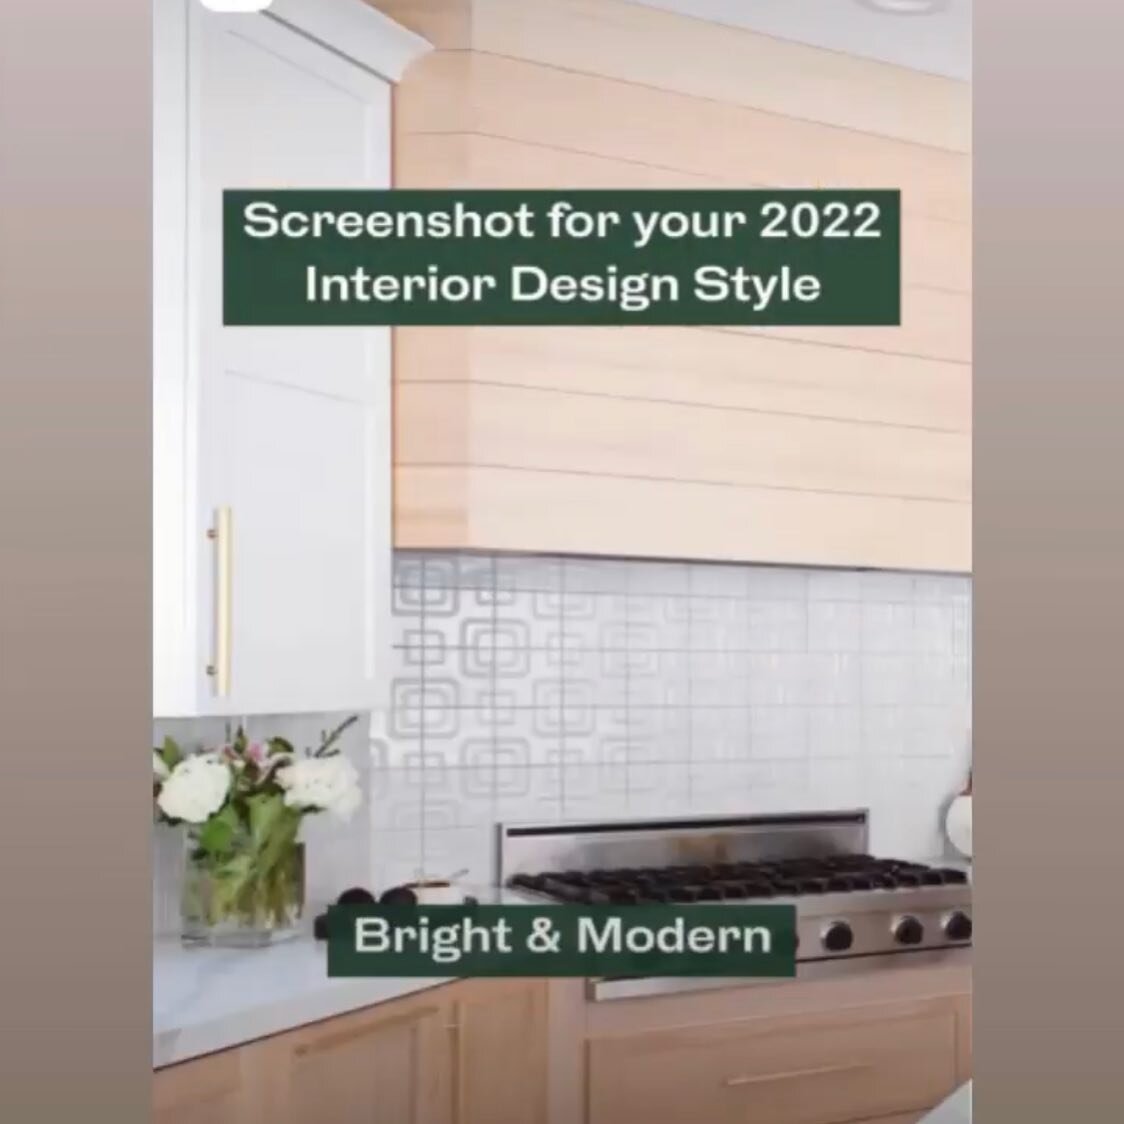 Nailed it on the first try. Definitely captures (one of) my style vibe(s) especially &hellip; as I think about the dream home I want just up the road.

Check out @insidebysavvy stories to find your design style. I want to know - was it right!?